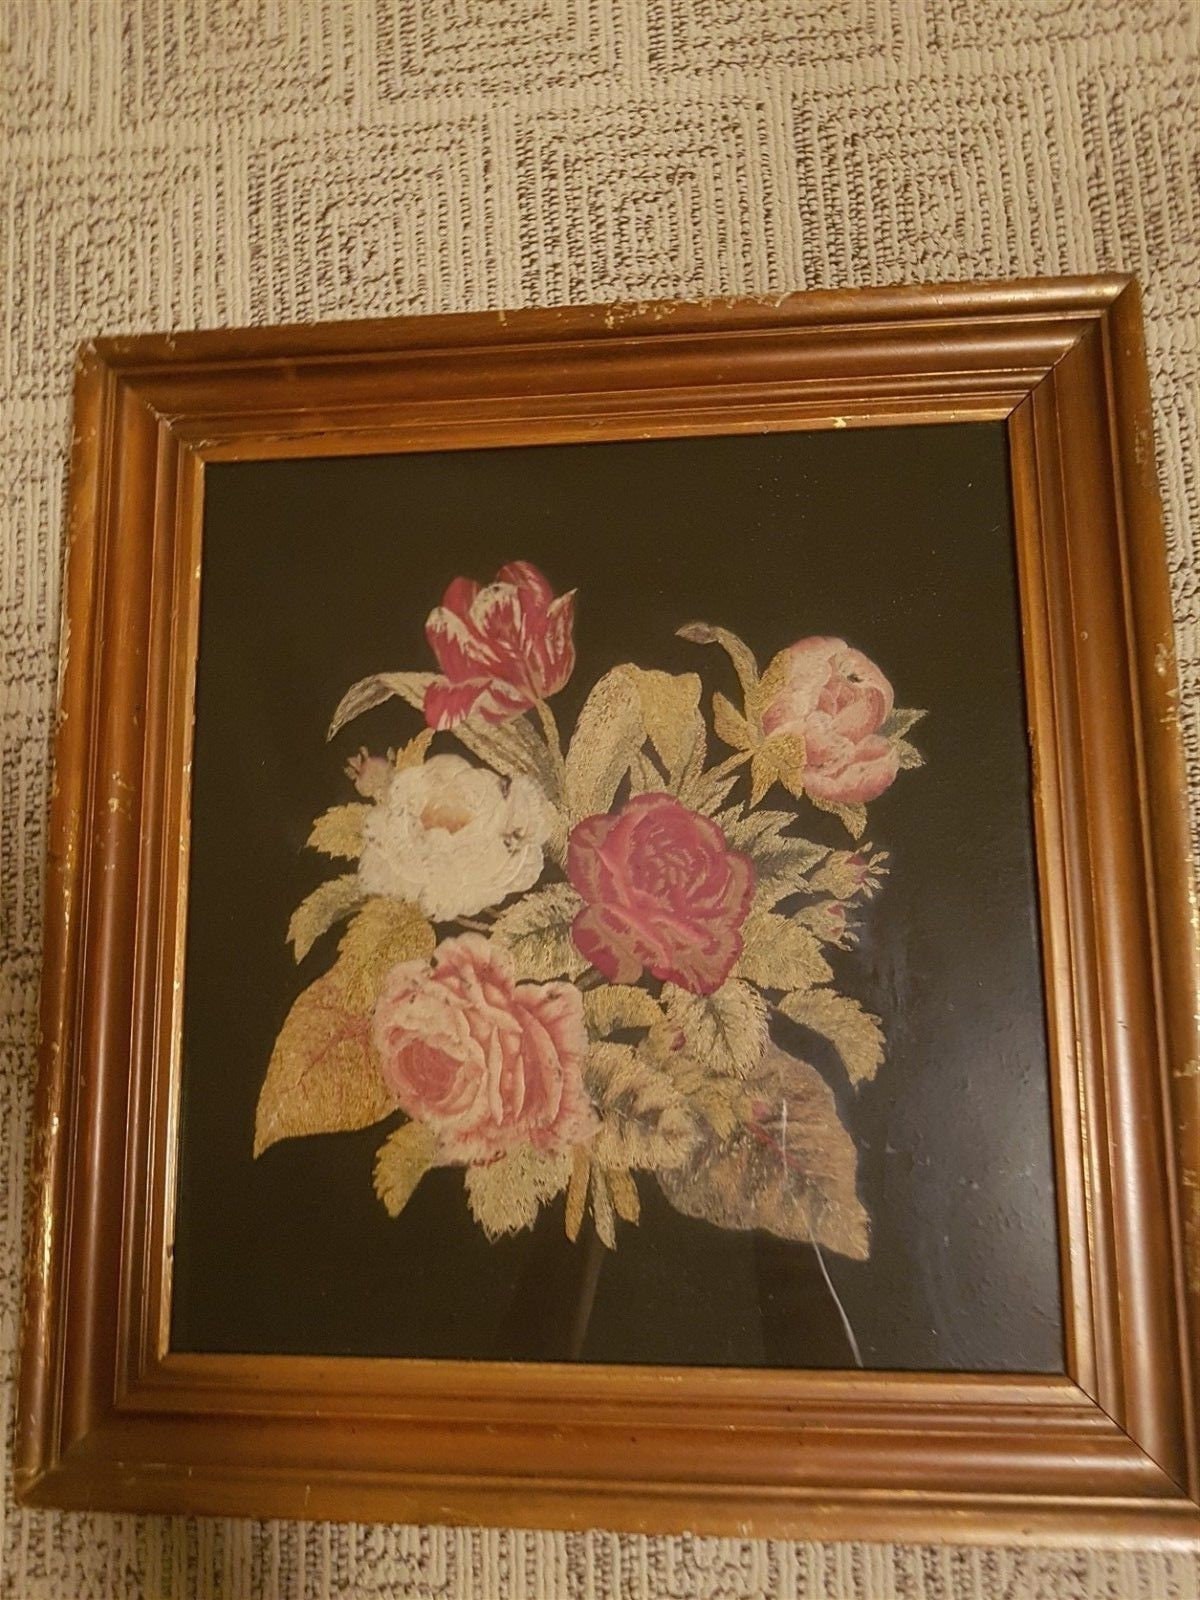 Antique Framed Embroidery of Flowers Cabbage Roses 1800's - Etsy